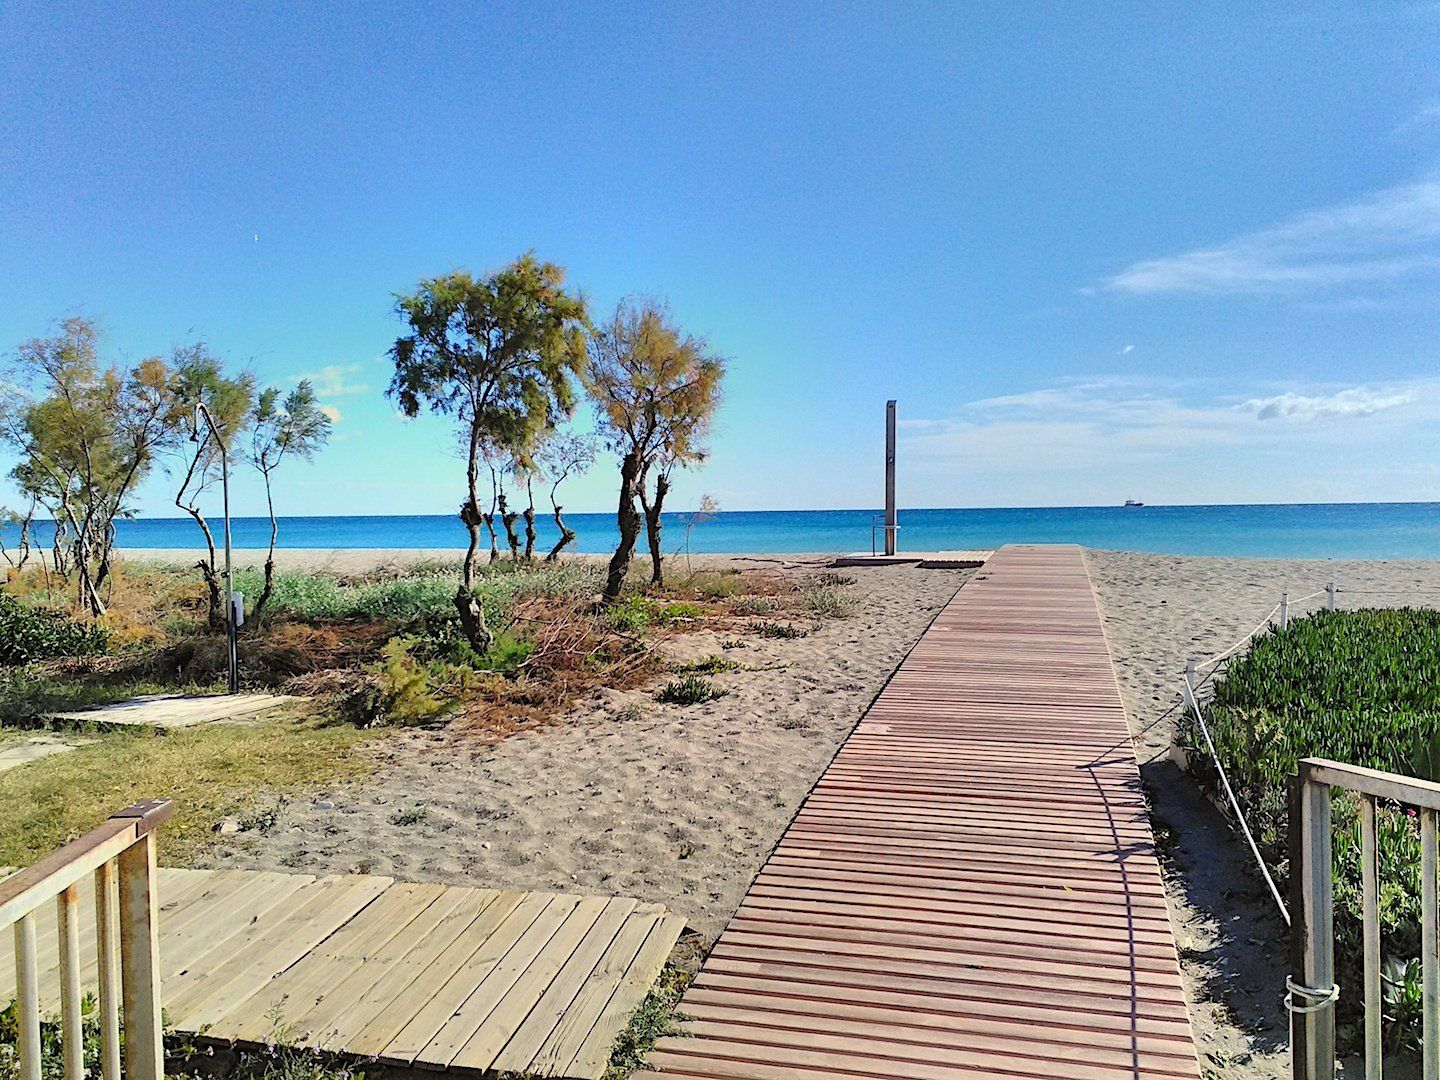 a rustic wooden plank walkway across the sand at the entrance to the vera playa naturist beach